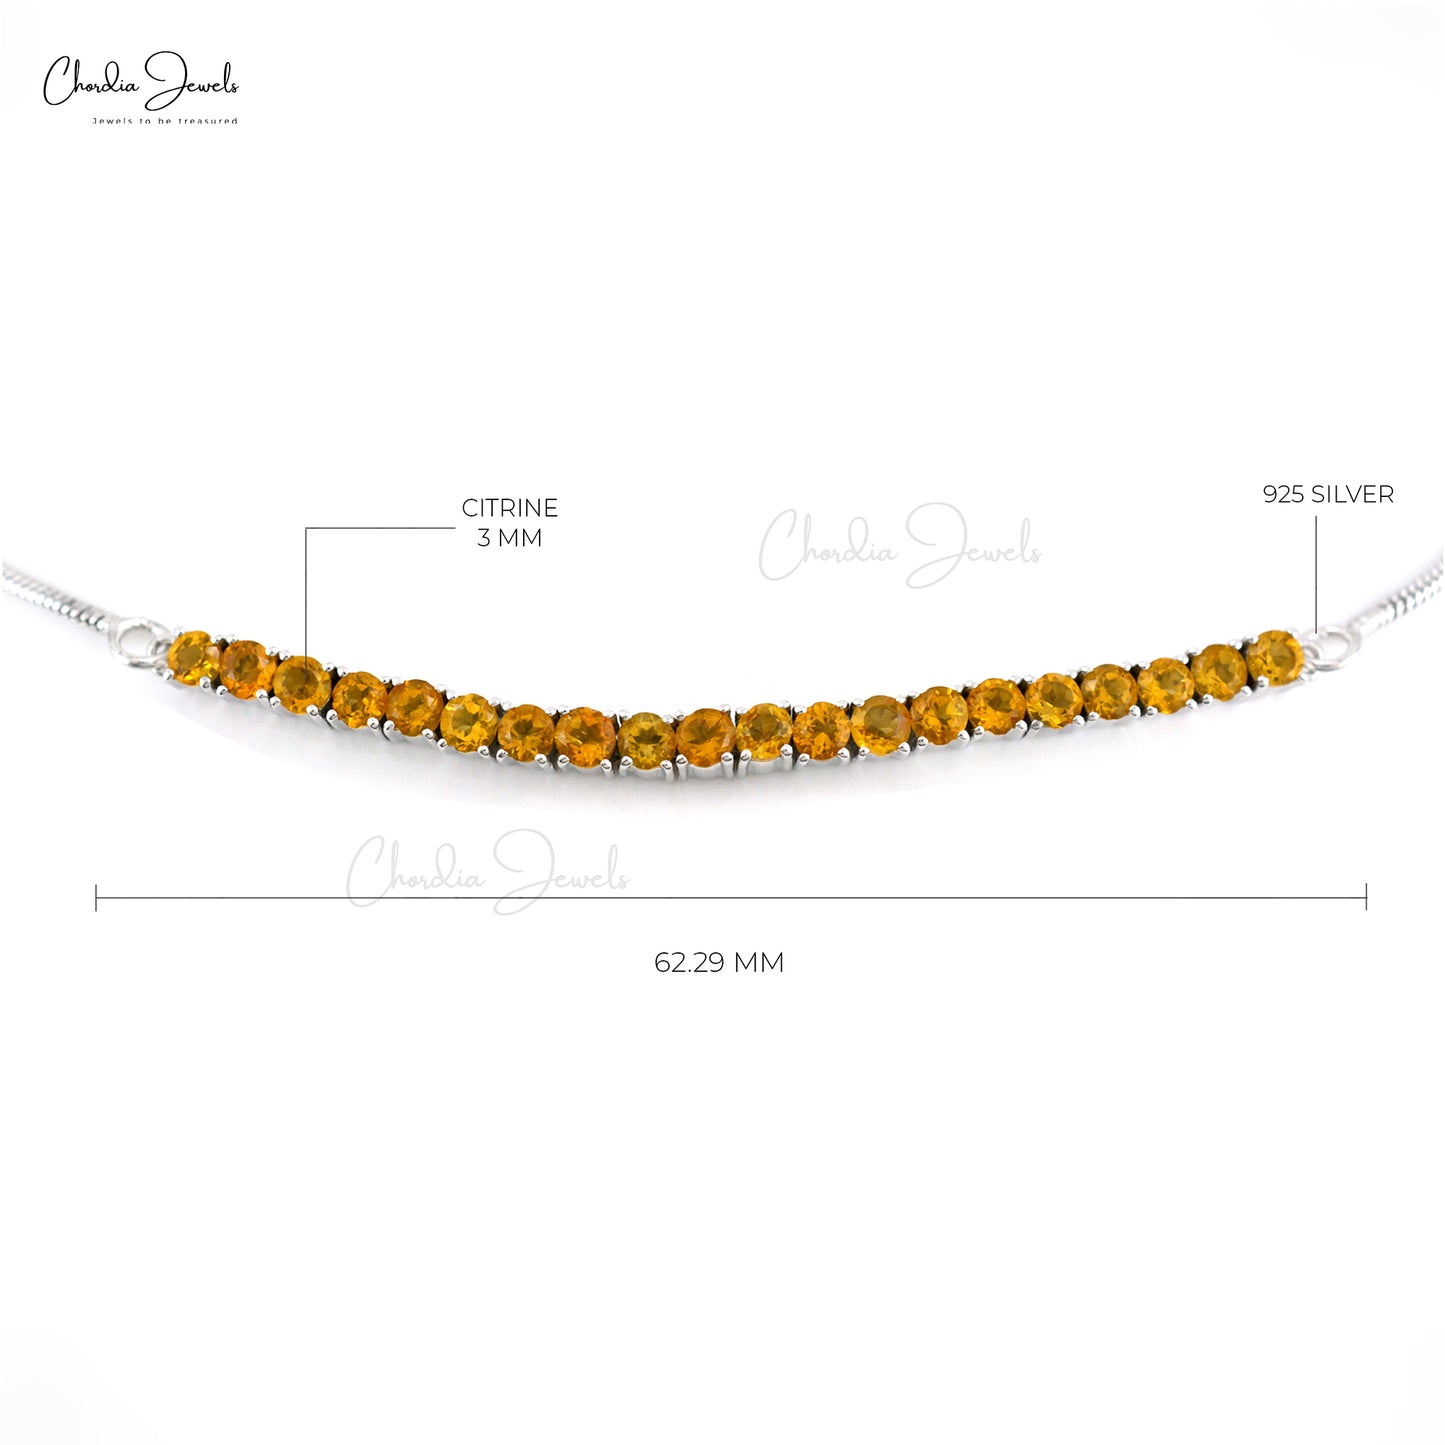 Load image into Gallery viewer, 100% Natural Citrine Bracelet 925 Sterling Silver Tennis Jewelry Prong Set Fashion Jewelry At Wholsale Price
